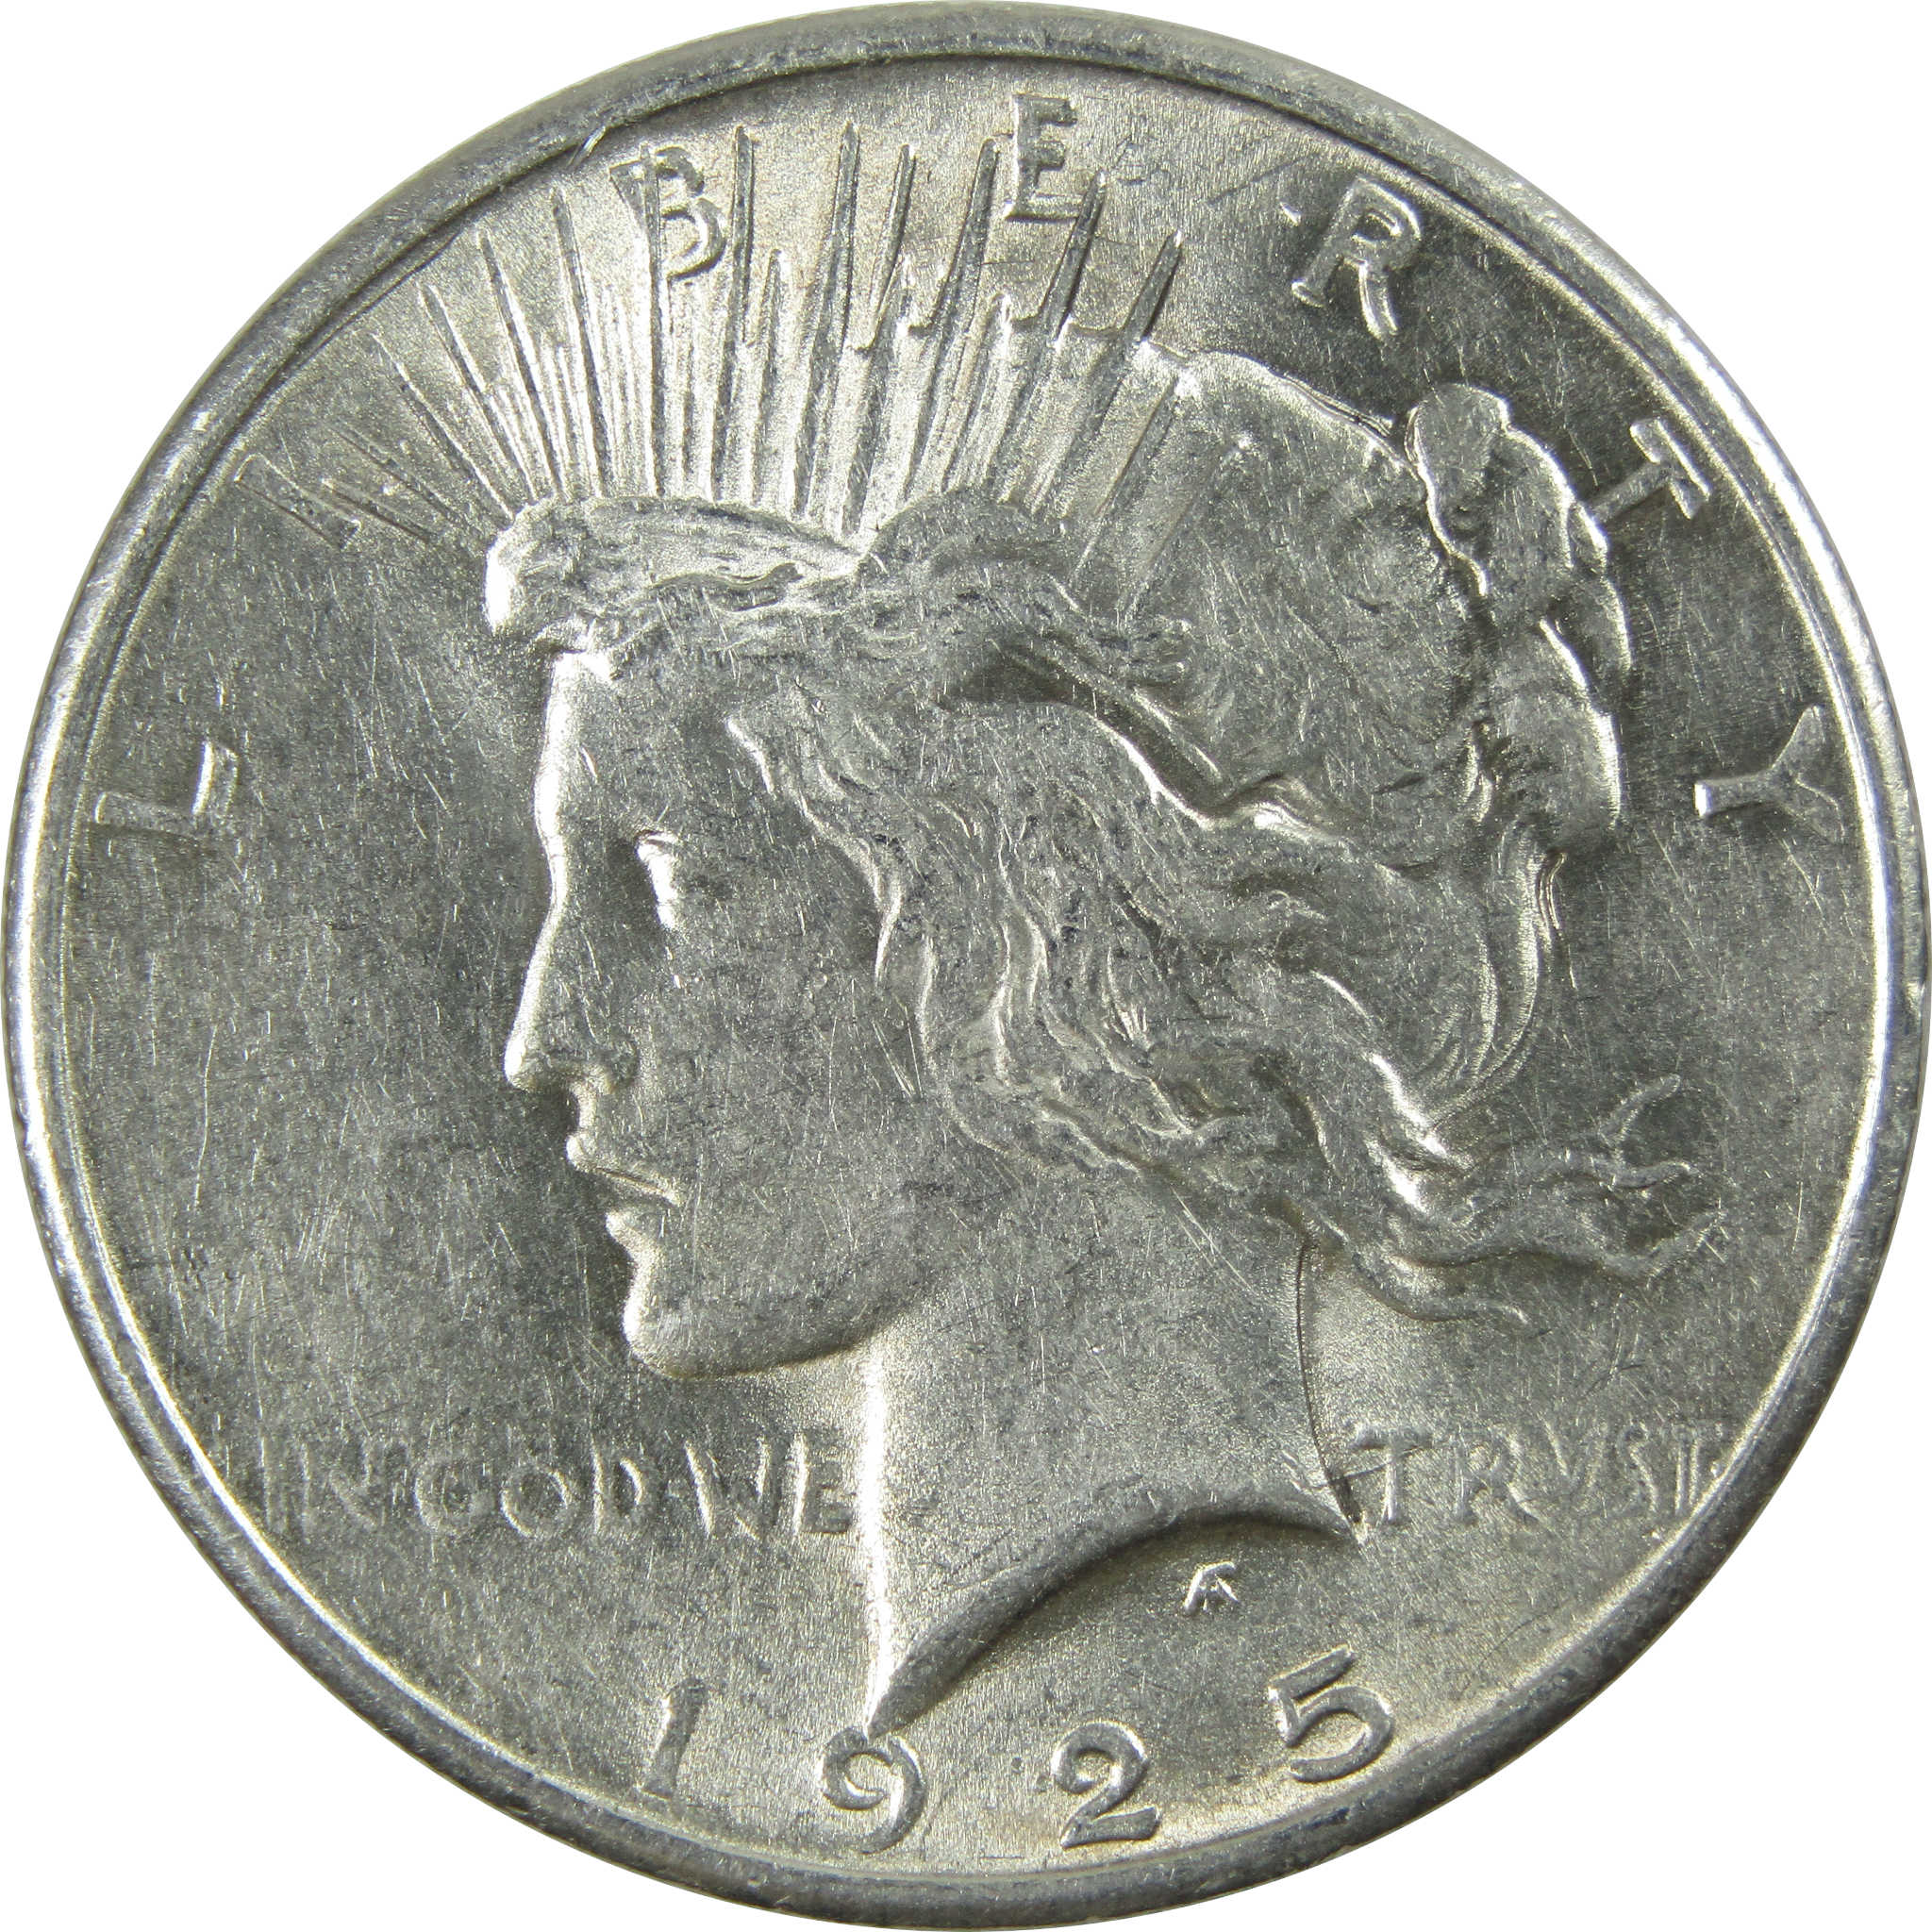 1925 Peace Dollar XF EF Extremely Fine Silver $1 Coin SKU:I13808